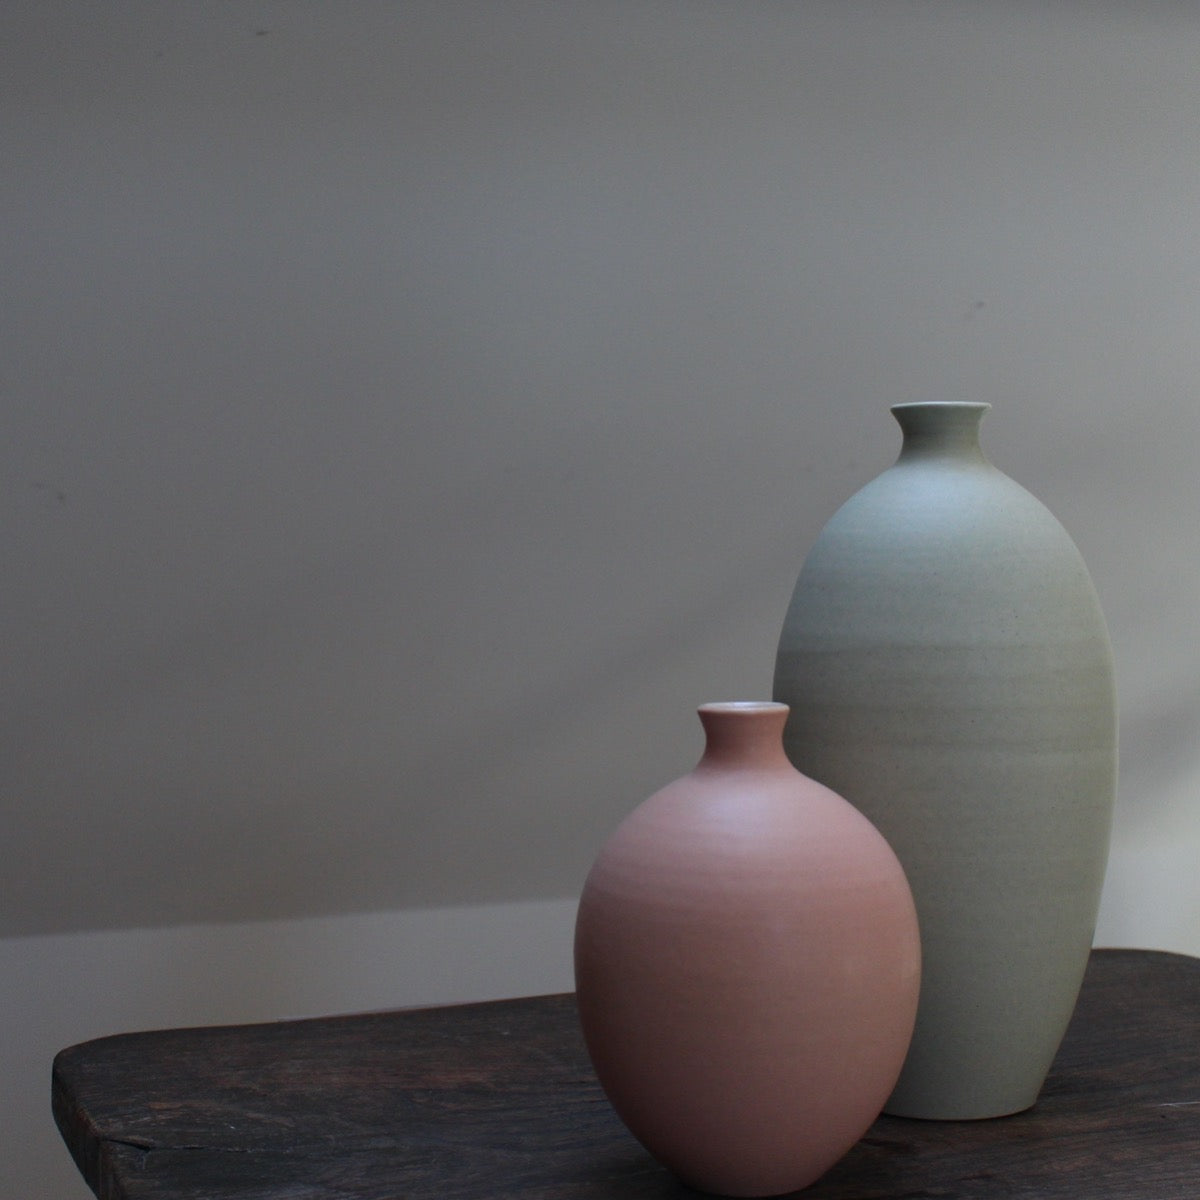 Two ceramic bottles by Lucy Burley on a wooden table - an oval shaped pale pink one and a taller one in light green shade